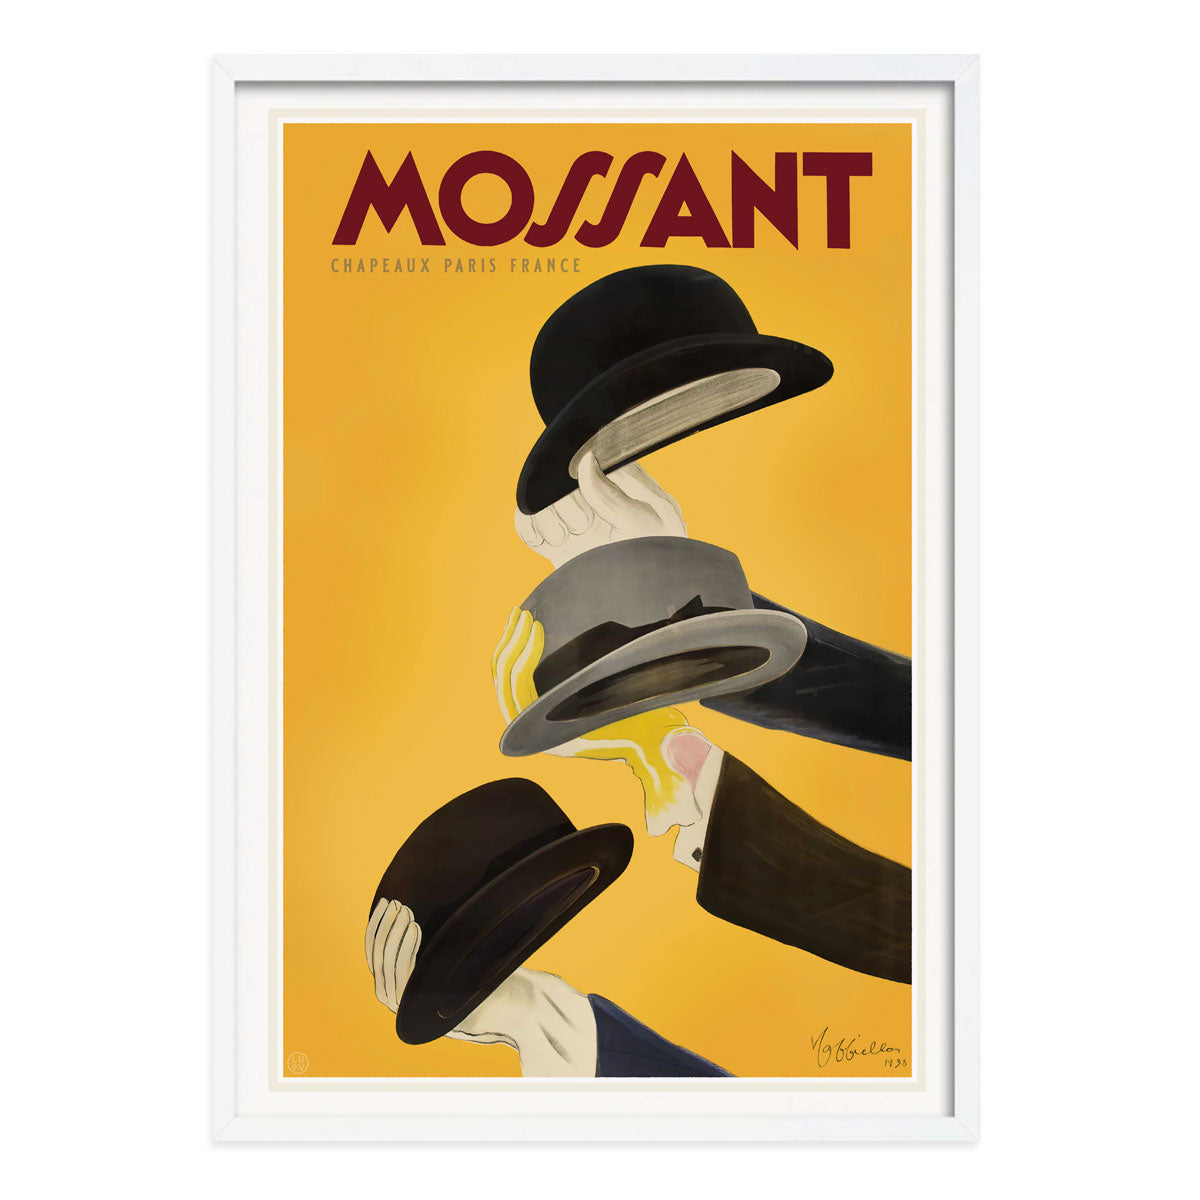 Mossant hats France vintage retro advertising poster in white frame from Places We Luv